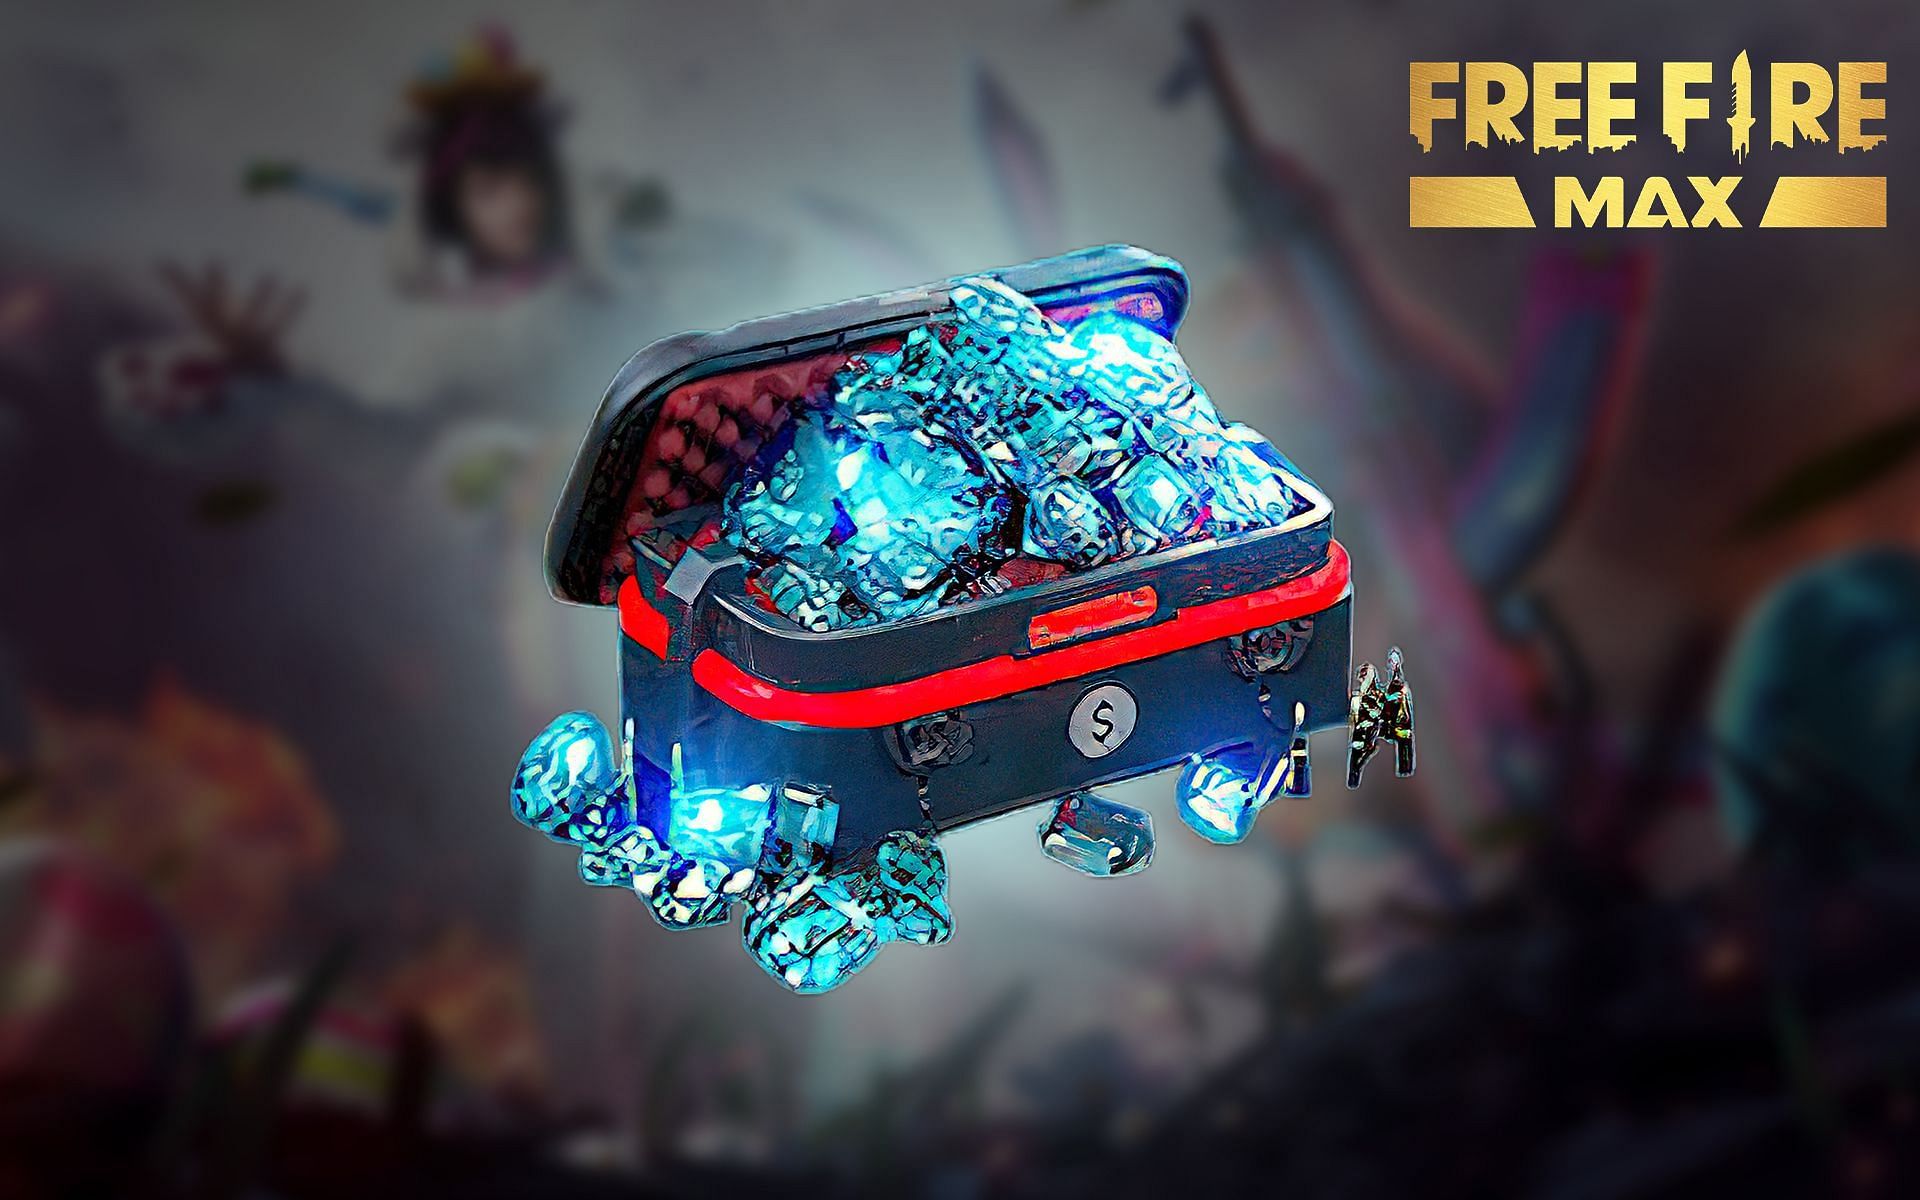 Diamonds can be used by gamers for numerous purposes in Free Fire MAX (Image via Sportskeeda)